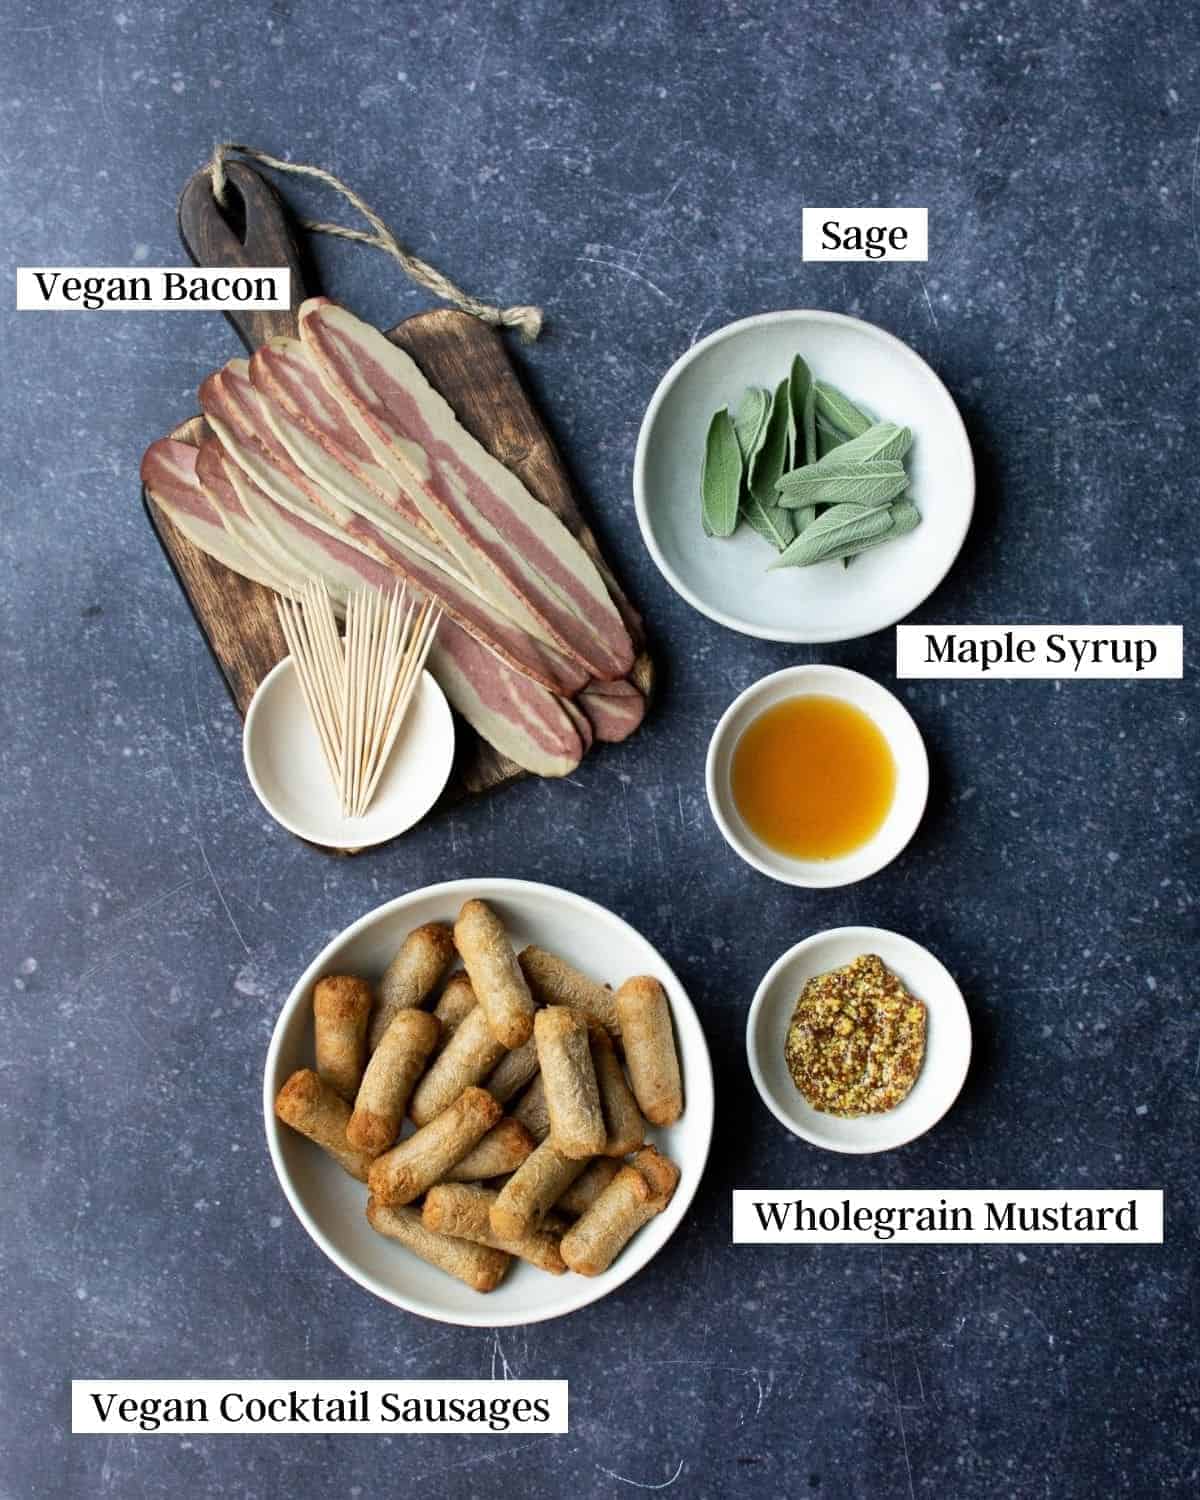 Labelled ingredients in bowls and on a board